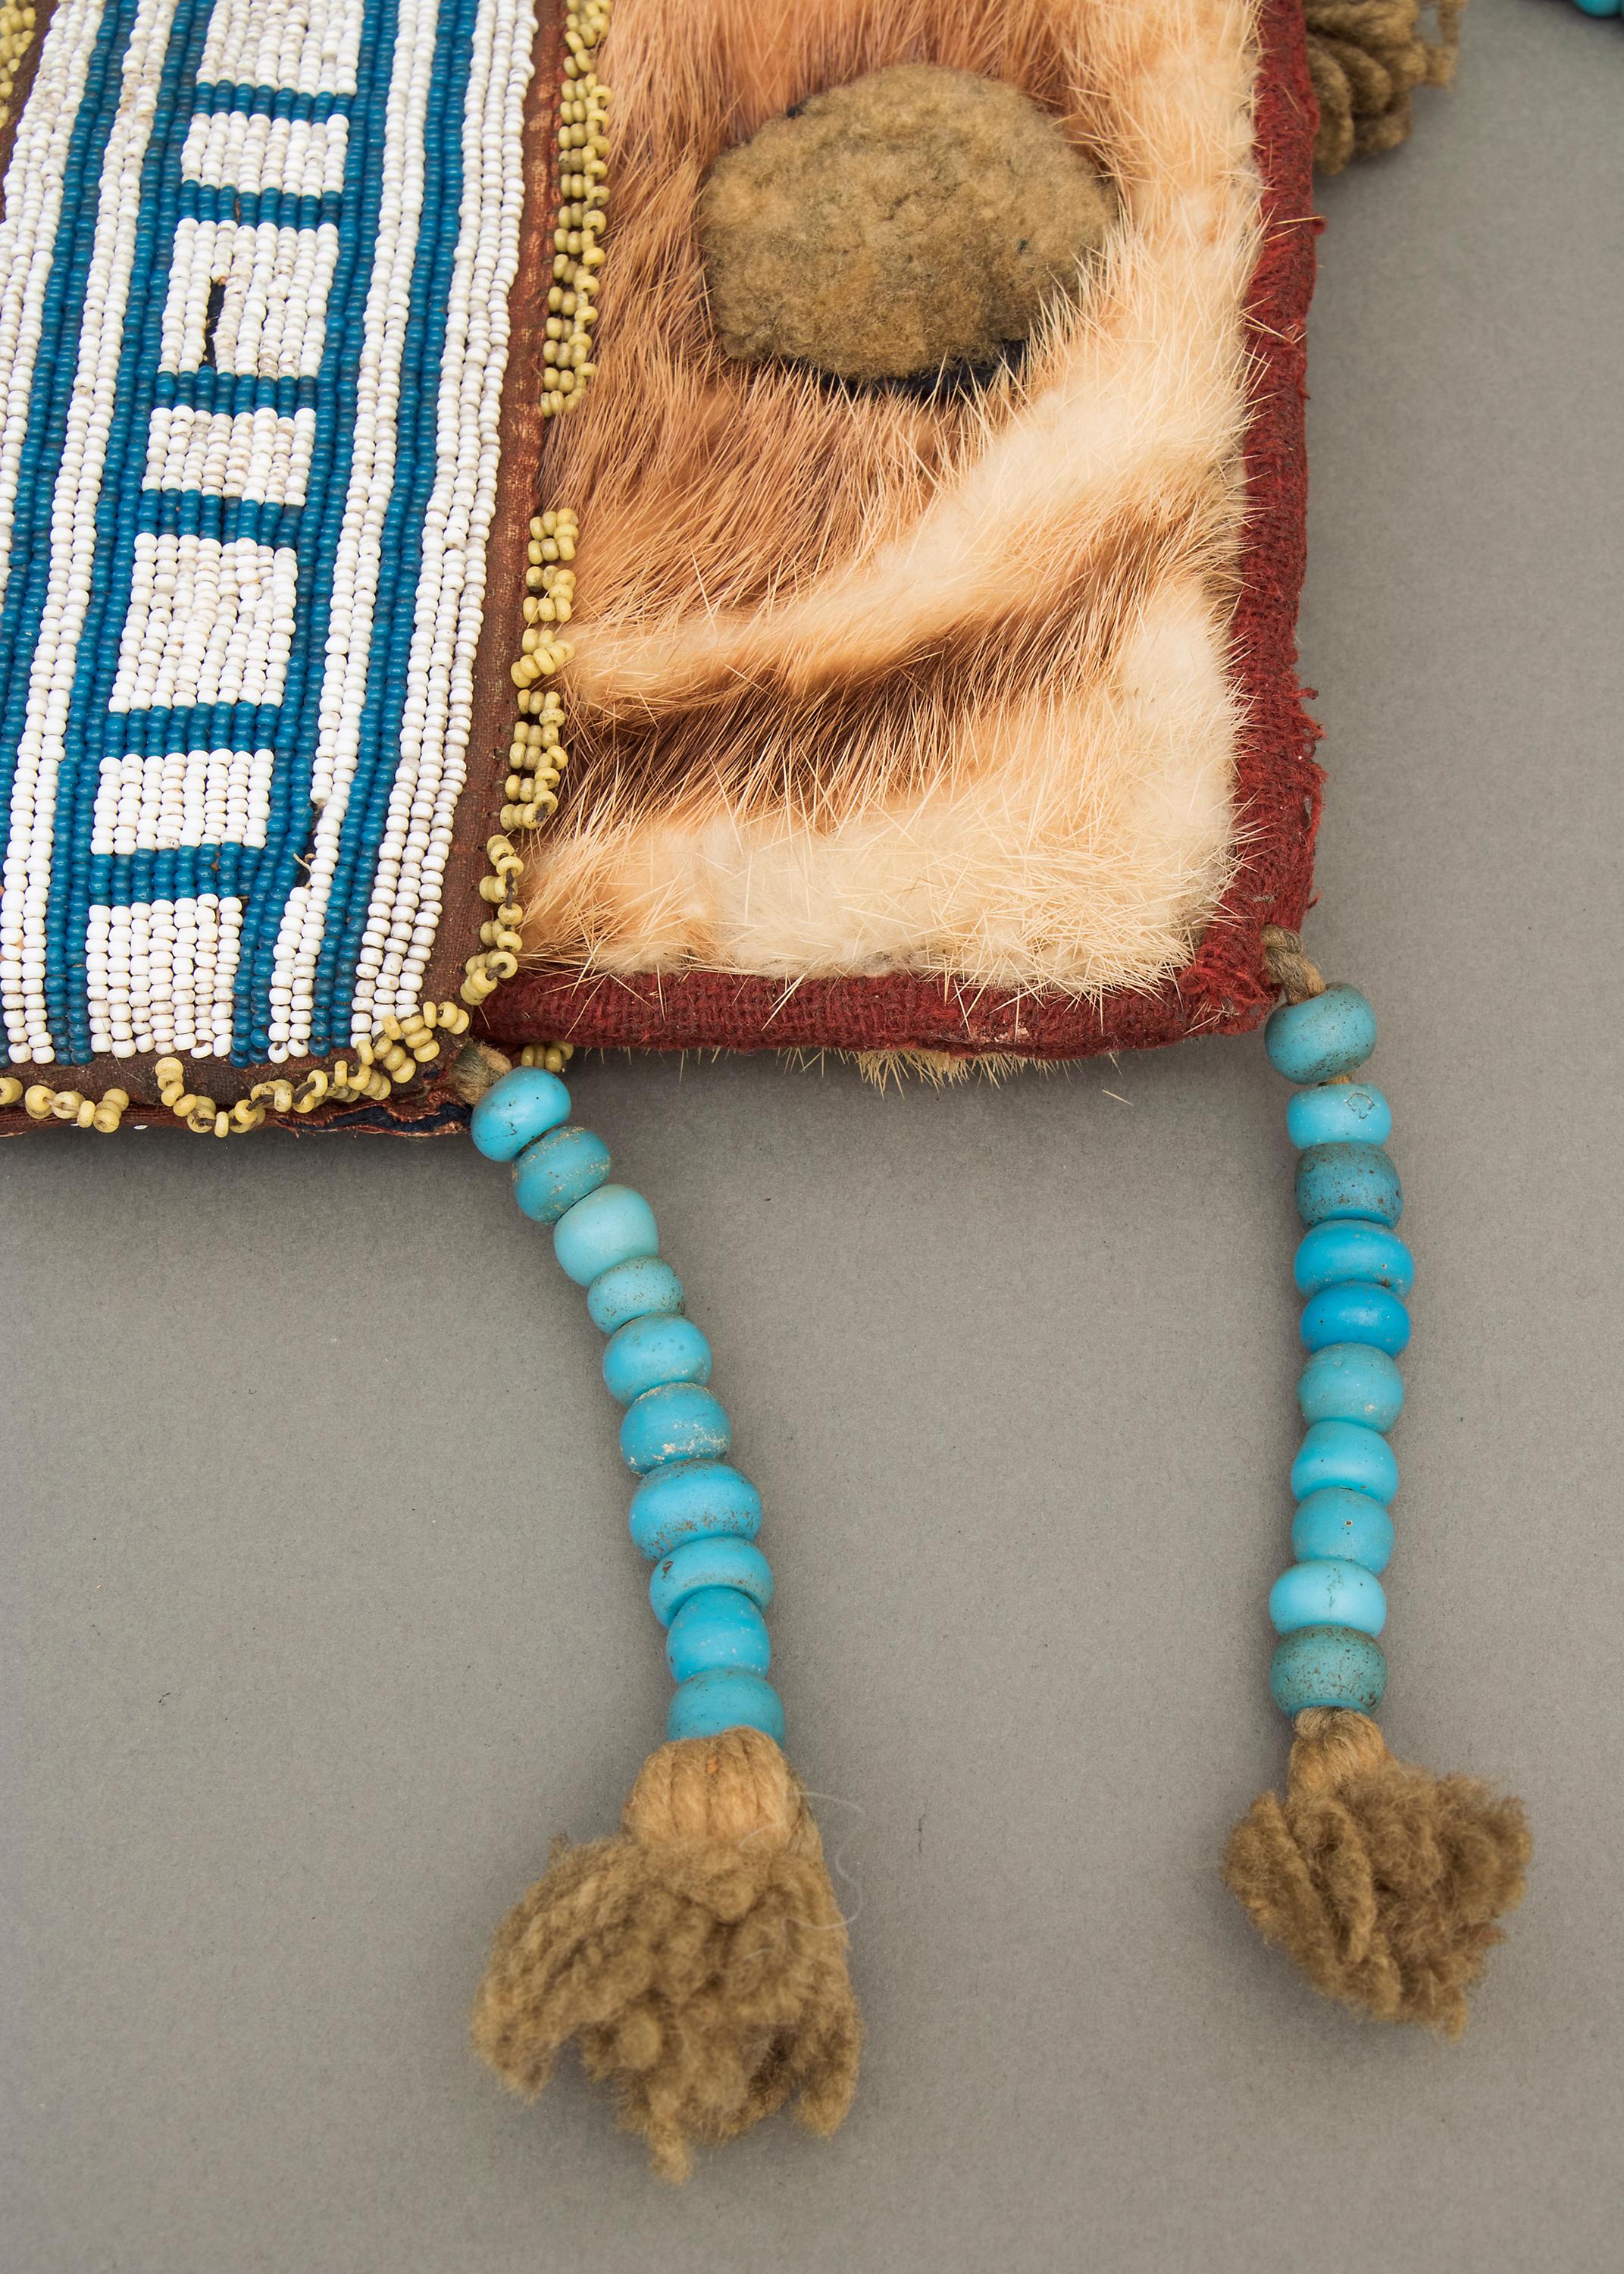 This remarkable antique Northwest Coast Native American hide pouch was created by a member of the Athapaskan tribe (North American Indian) around the middle of the 19th century, known as the Classic Period of American Indian art (predating the